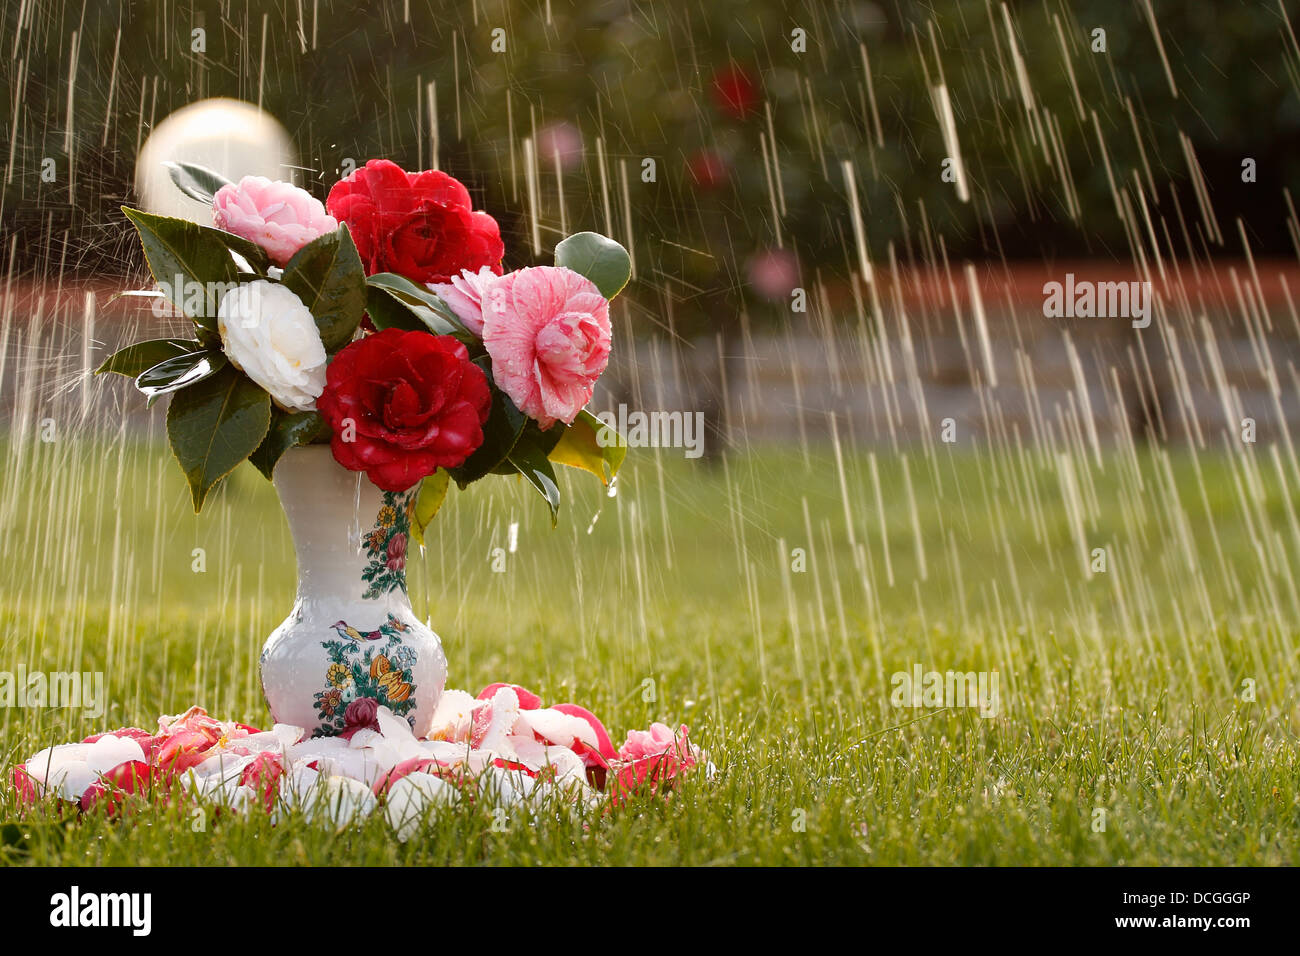 A jar of camelia flower in the rain. Stock Photo